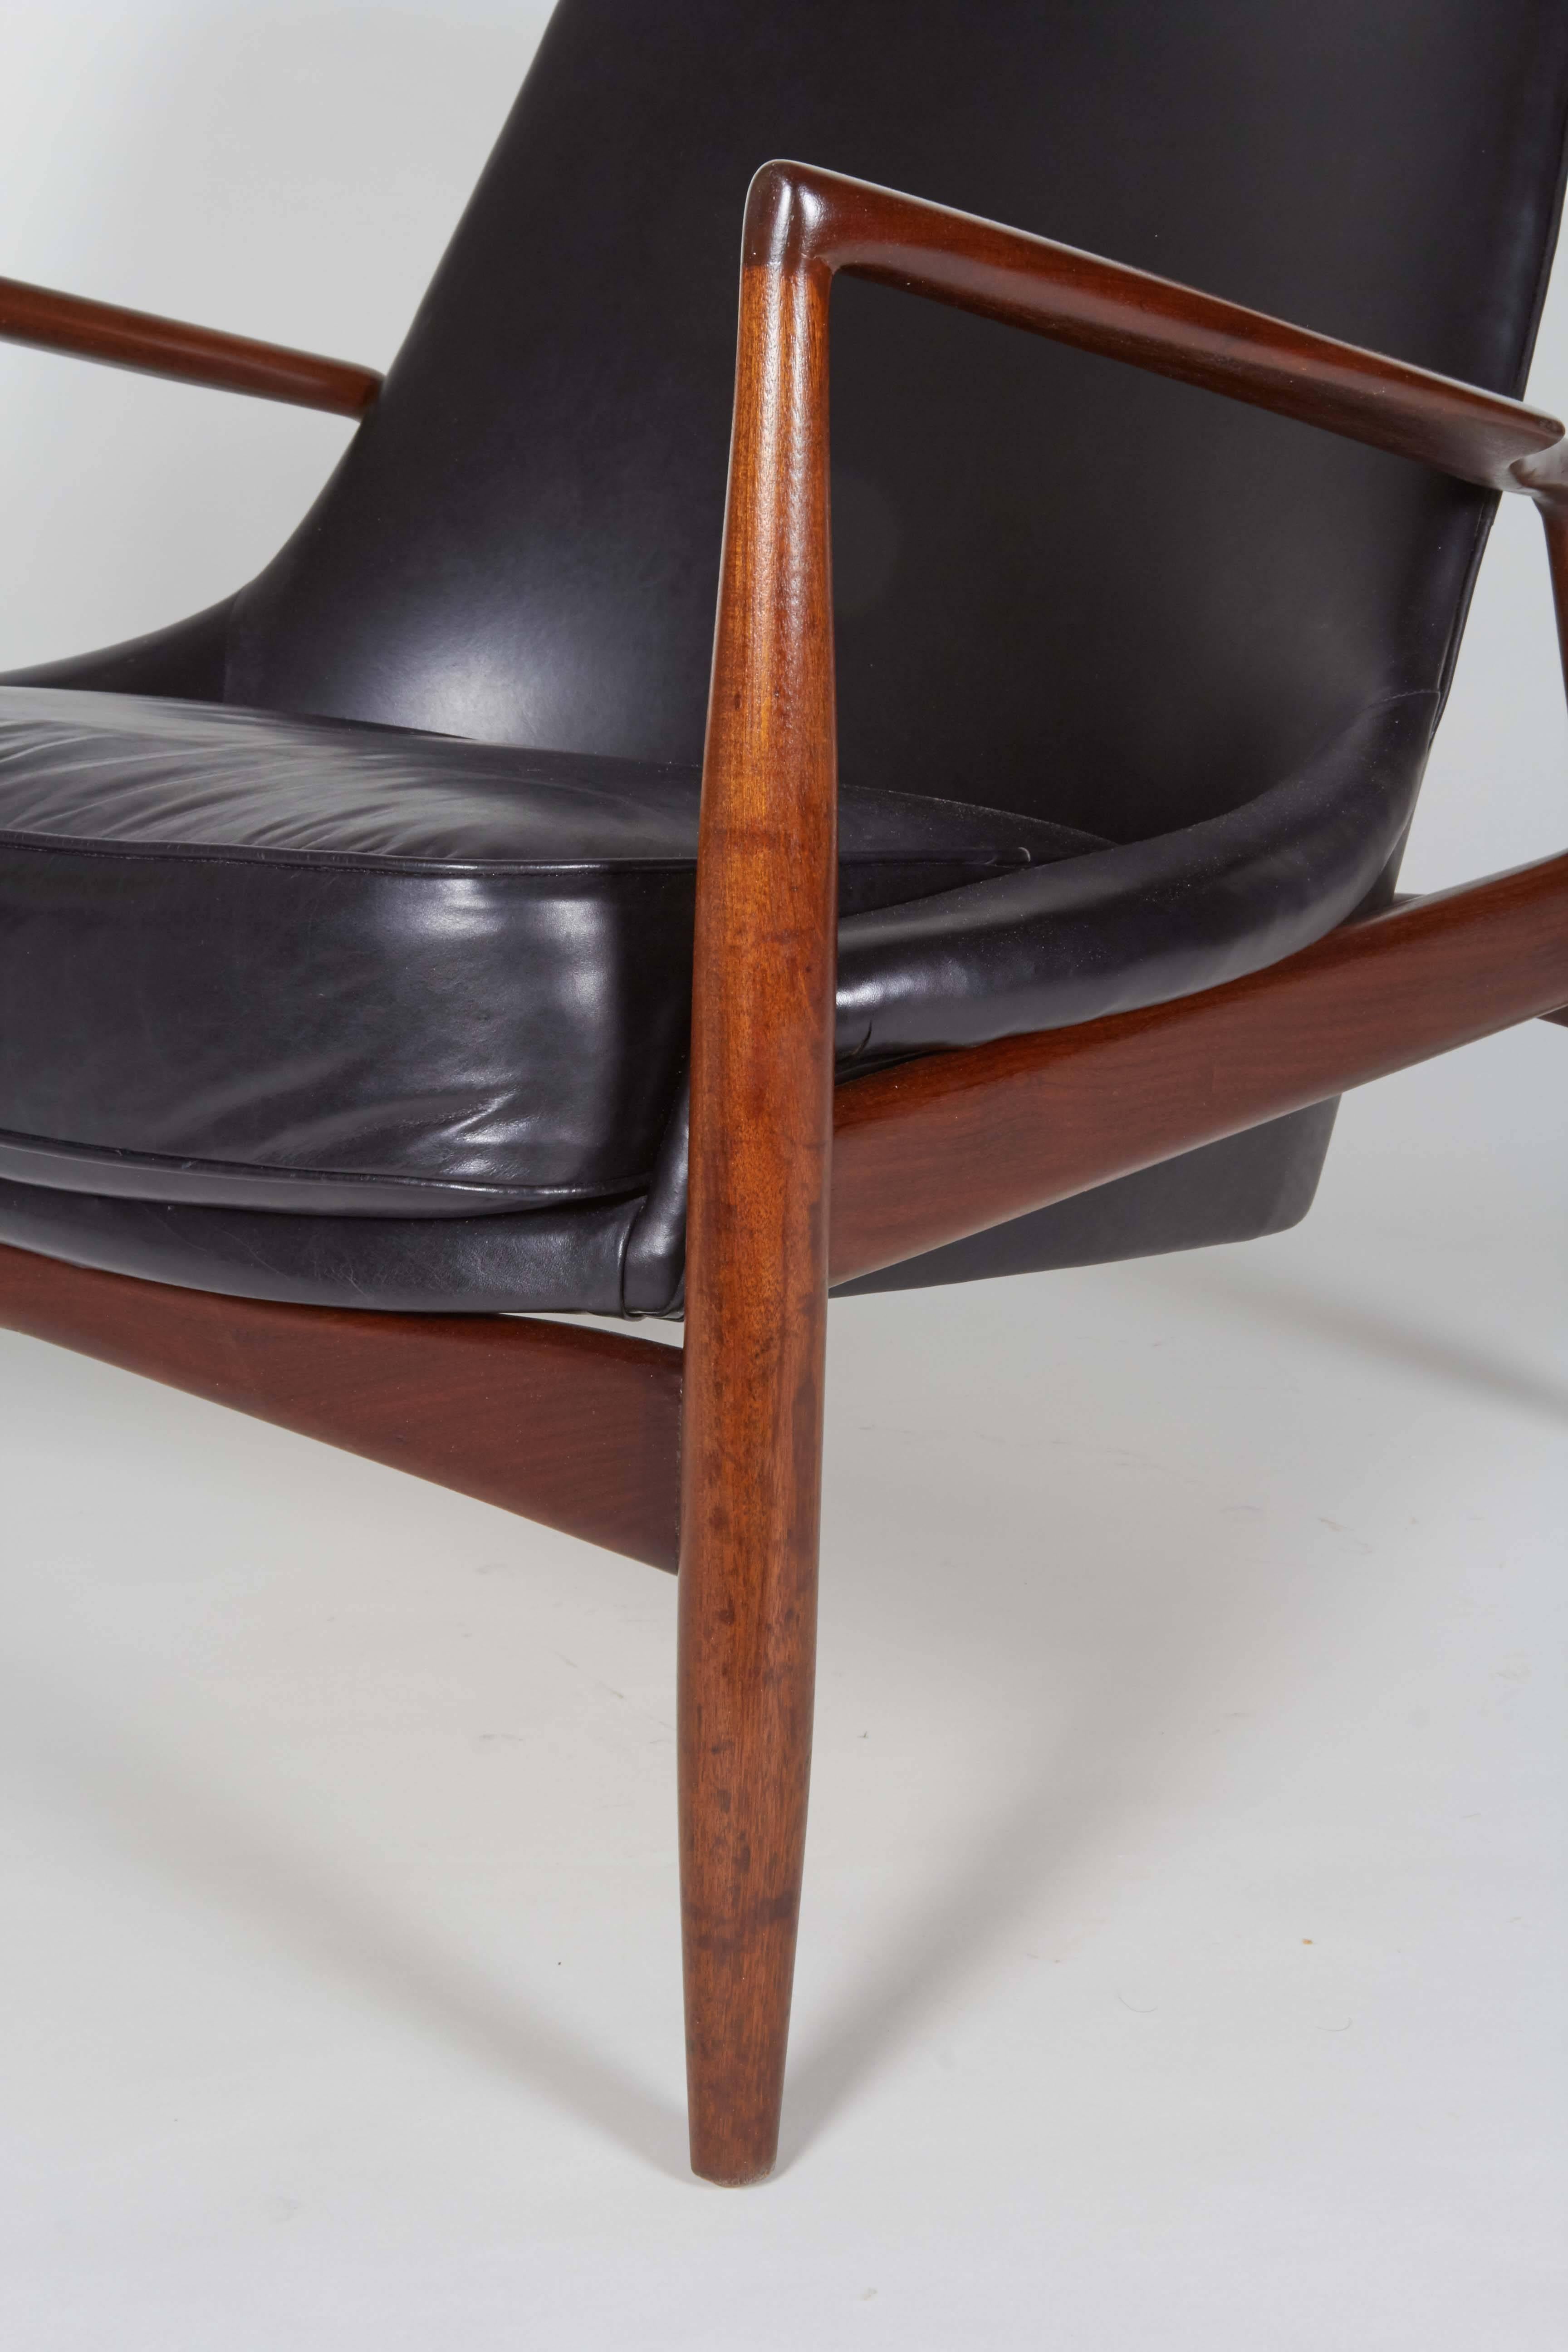 These rare chairs possess outstanding comfort and beauty. The leather is in wonderful condition.